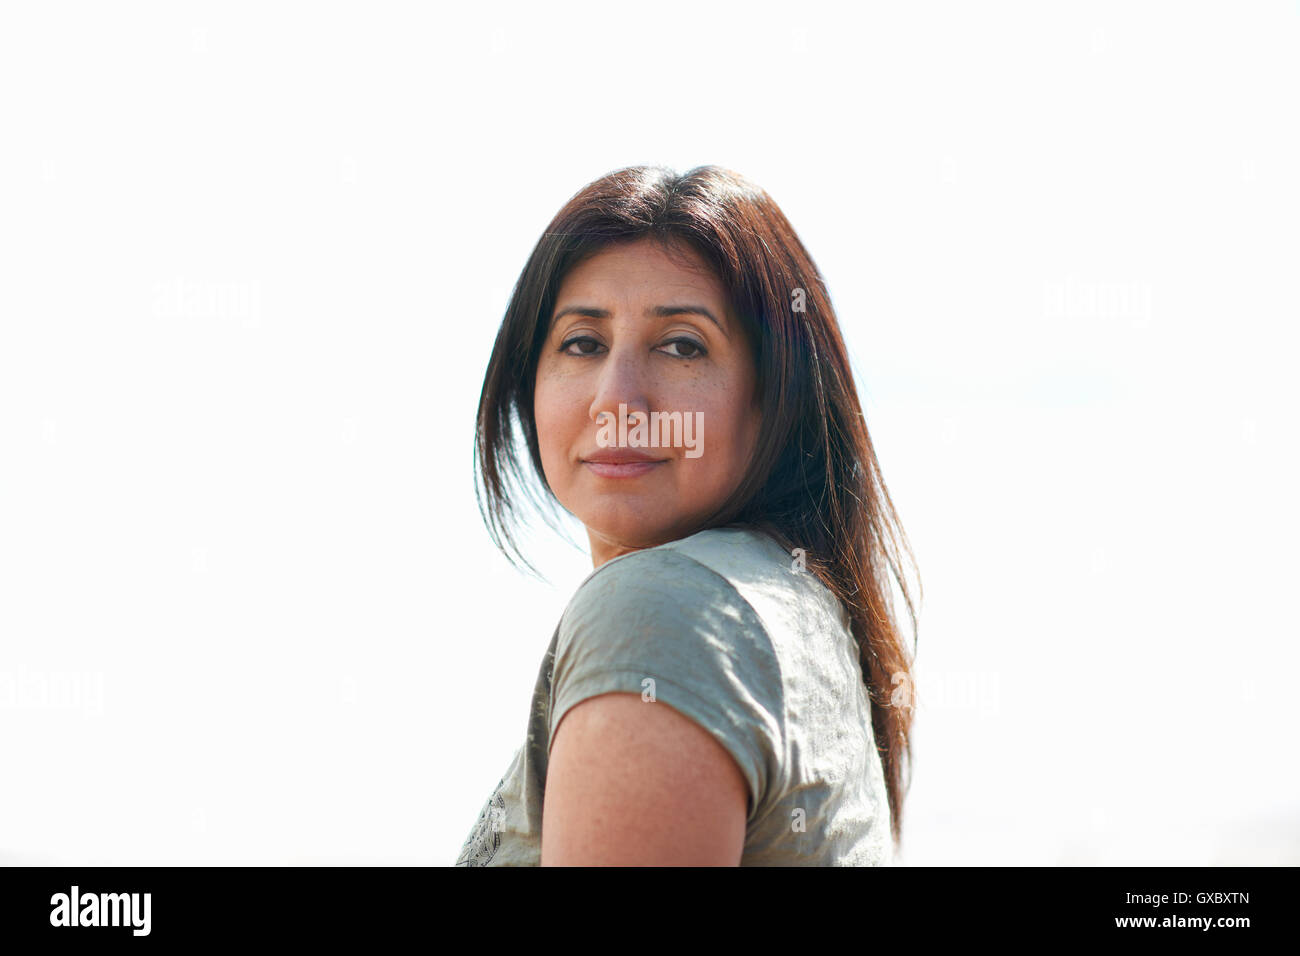 Woman with long brown hair looking over her shoulder,  Devon, UK Stock Photo